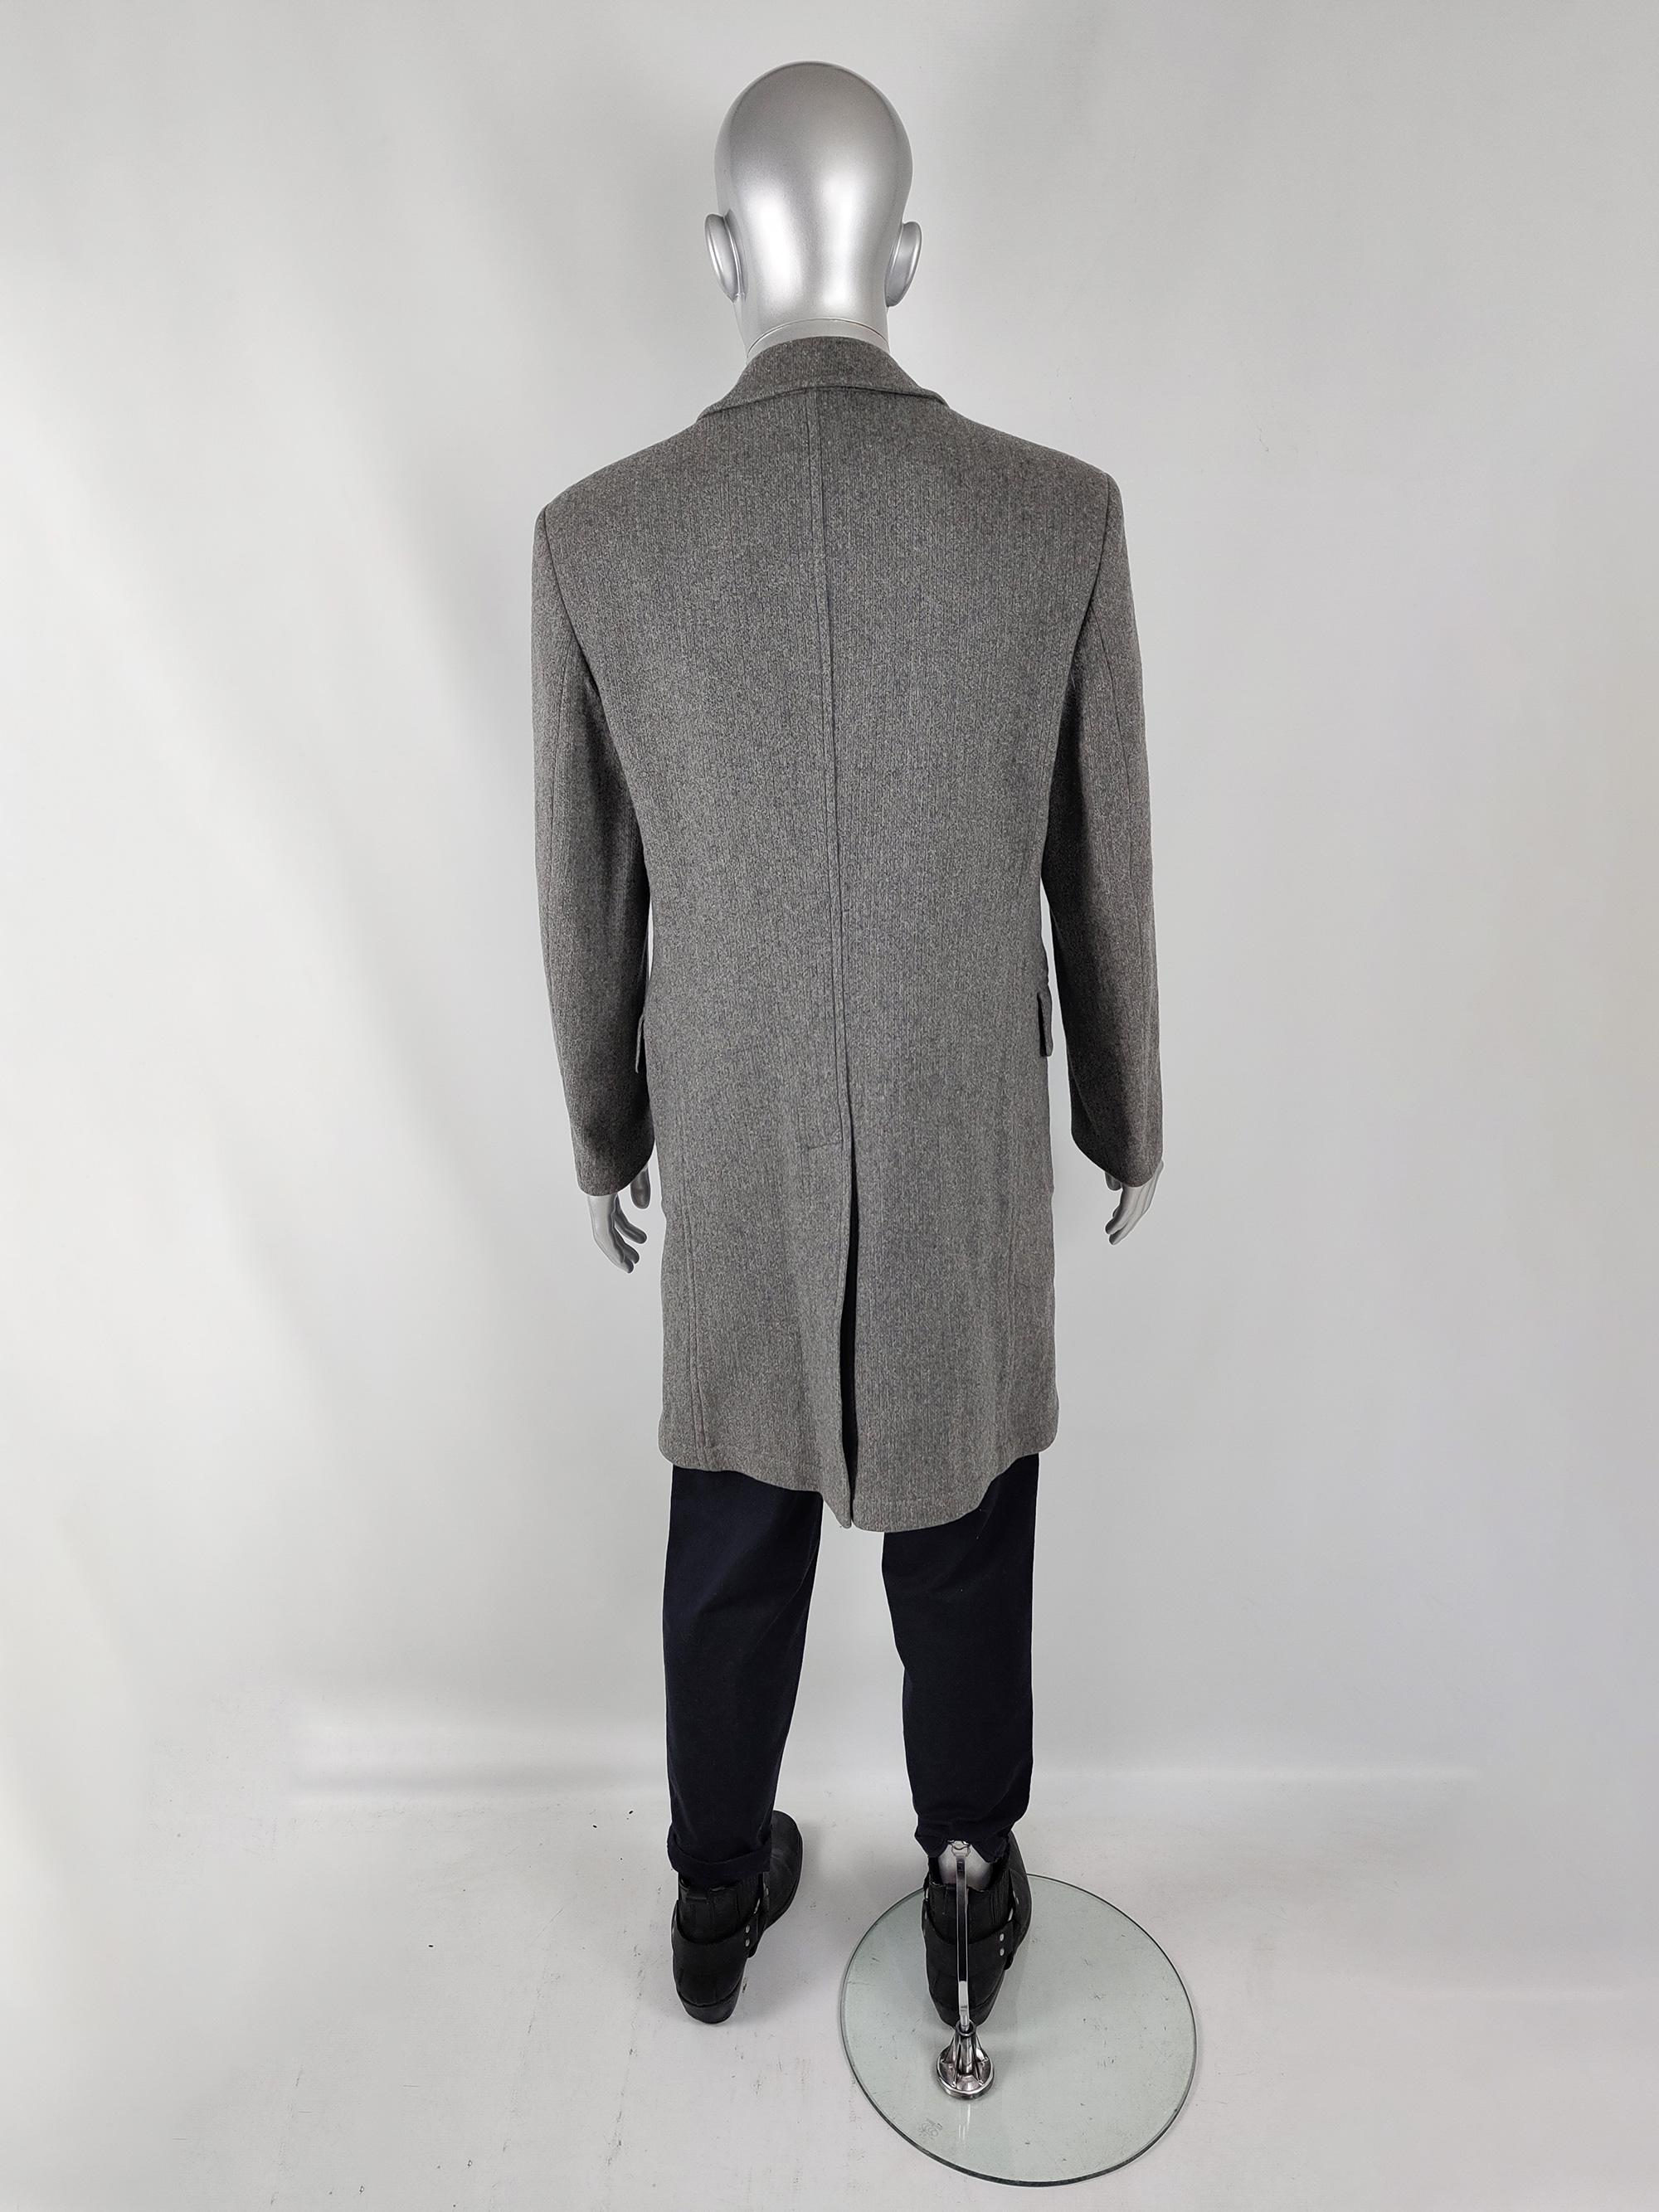 Vintage Mens Italian Wool & Cashmere Grey Knit Overcoat Covert Coat For Sale 1